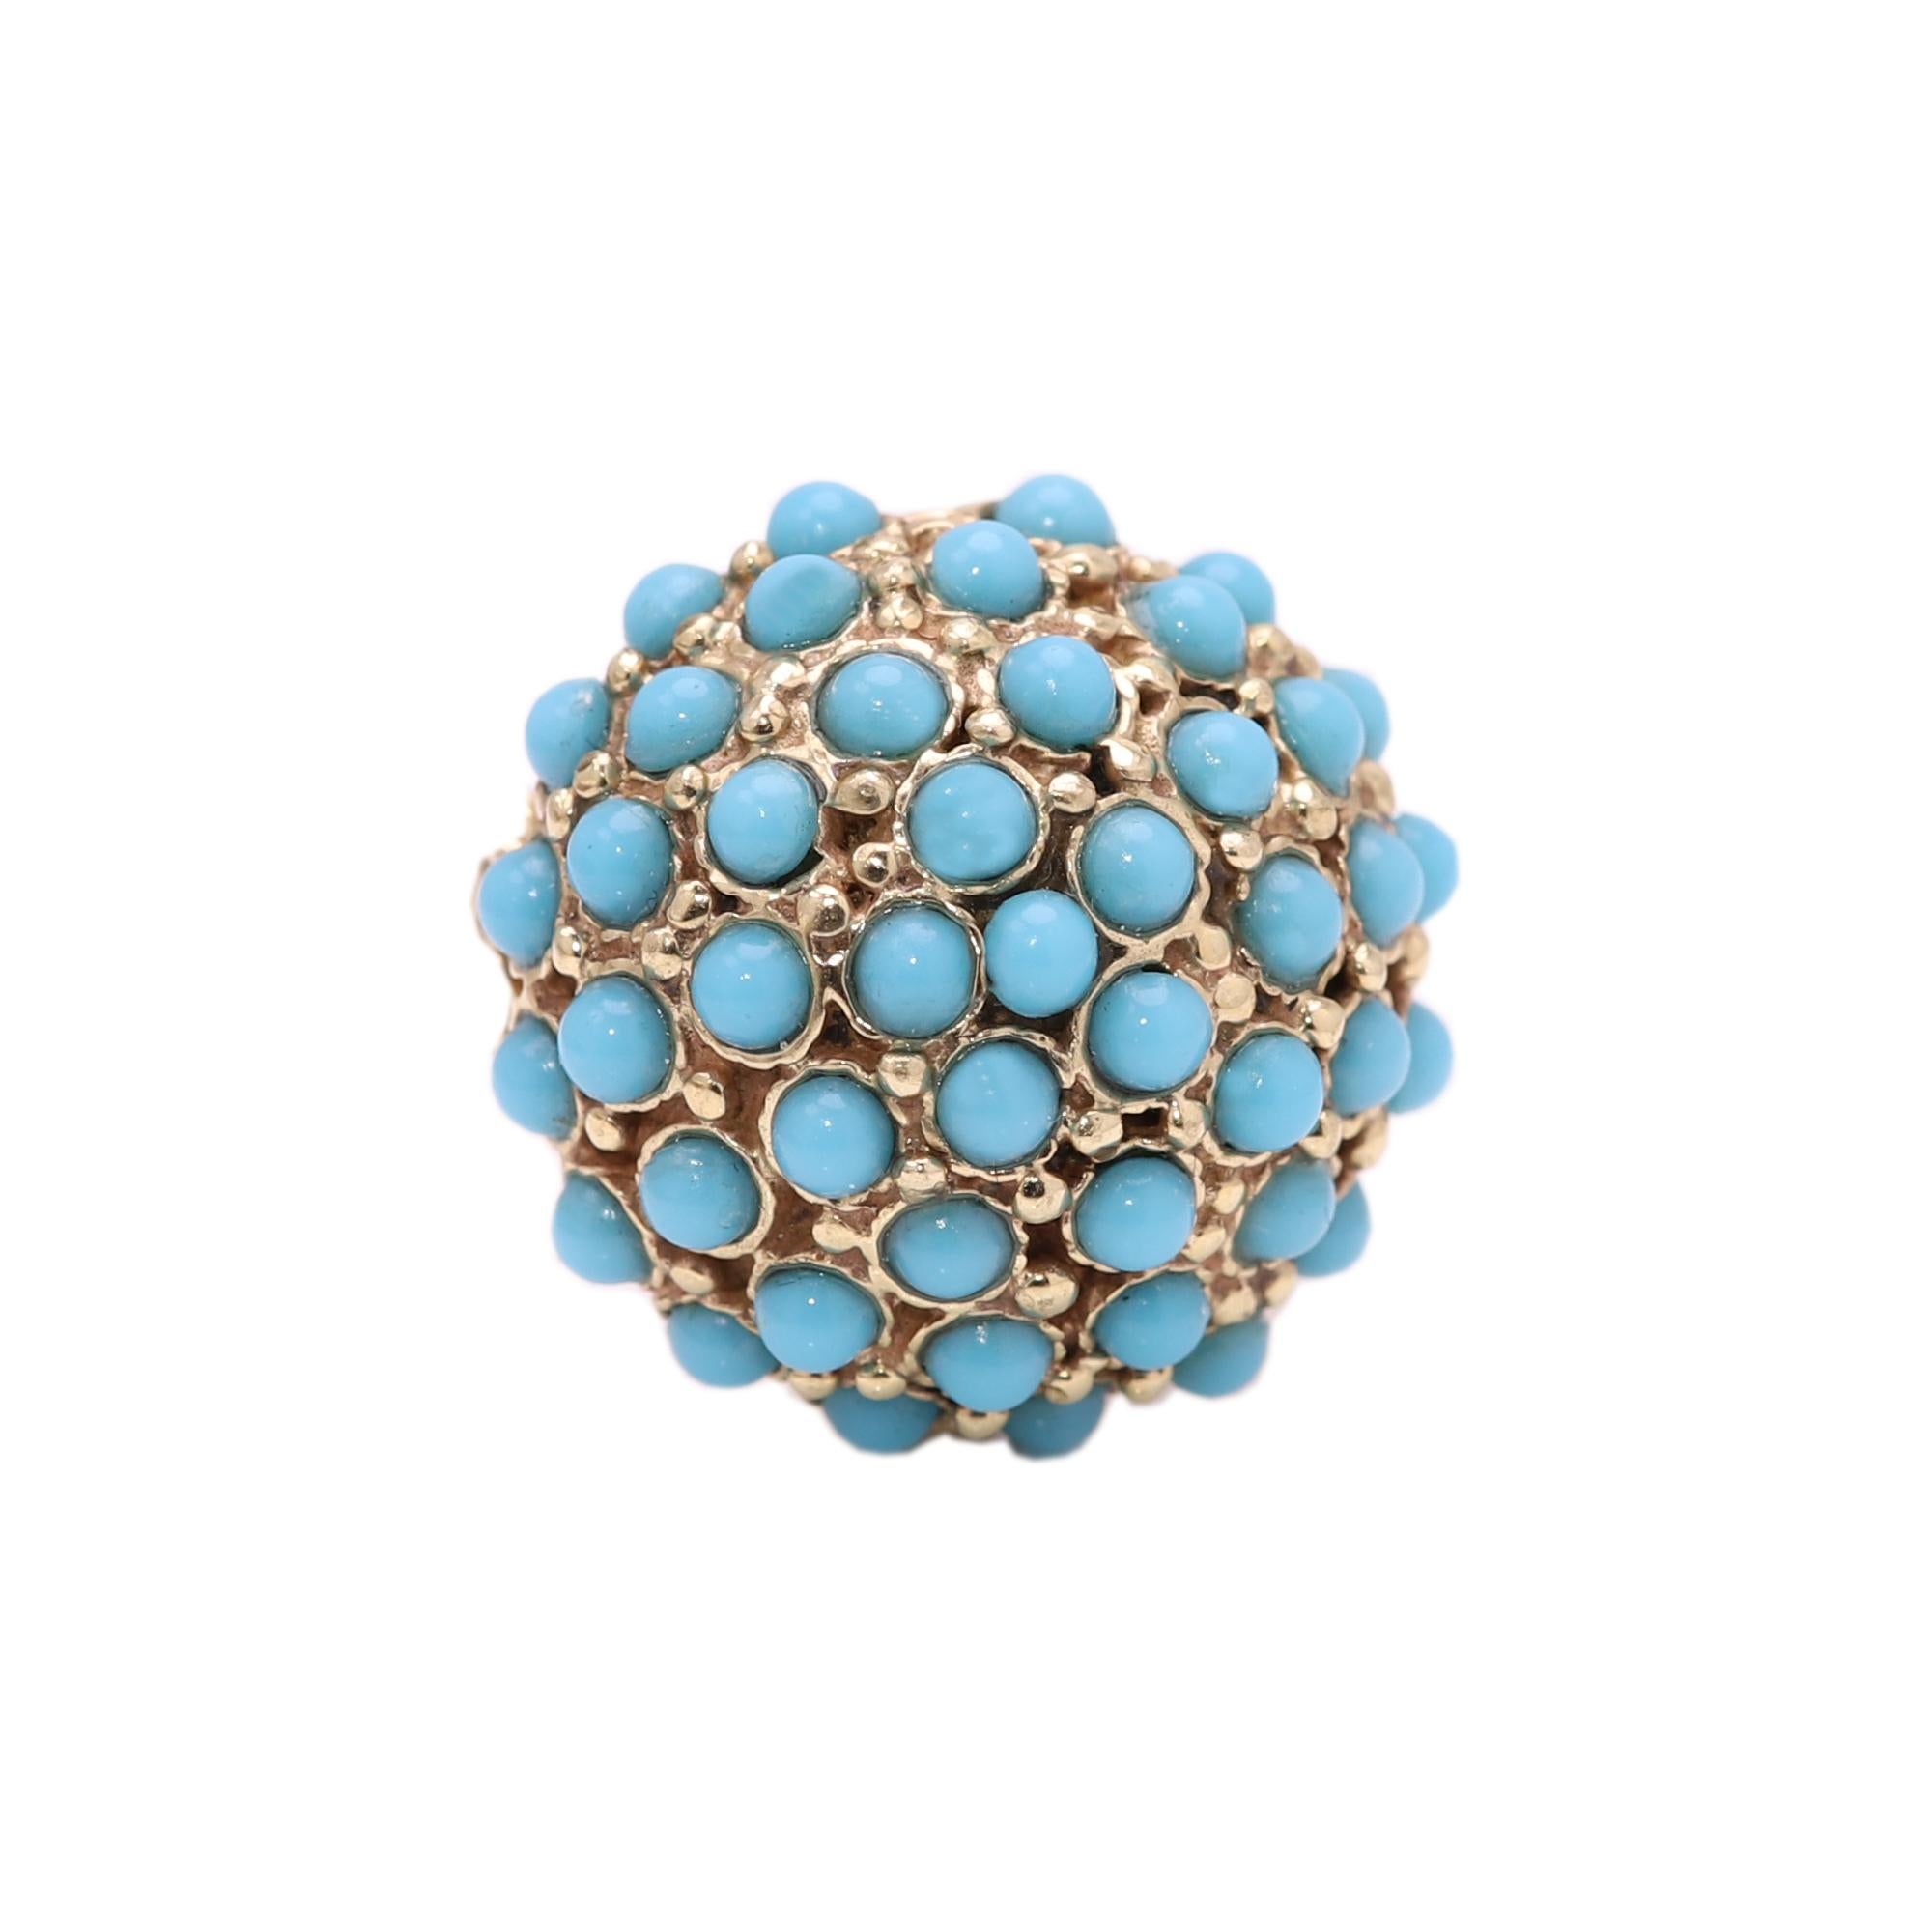 Women's Antique Turquoise Ring 14 Karat Yellow Gold Cluster Design Persian Turquoise For Sale